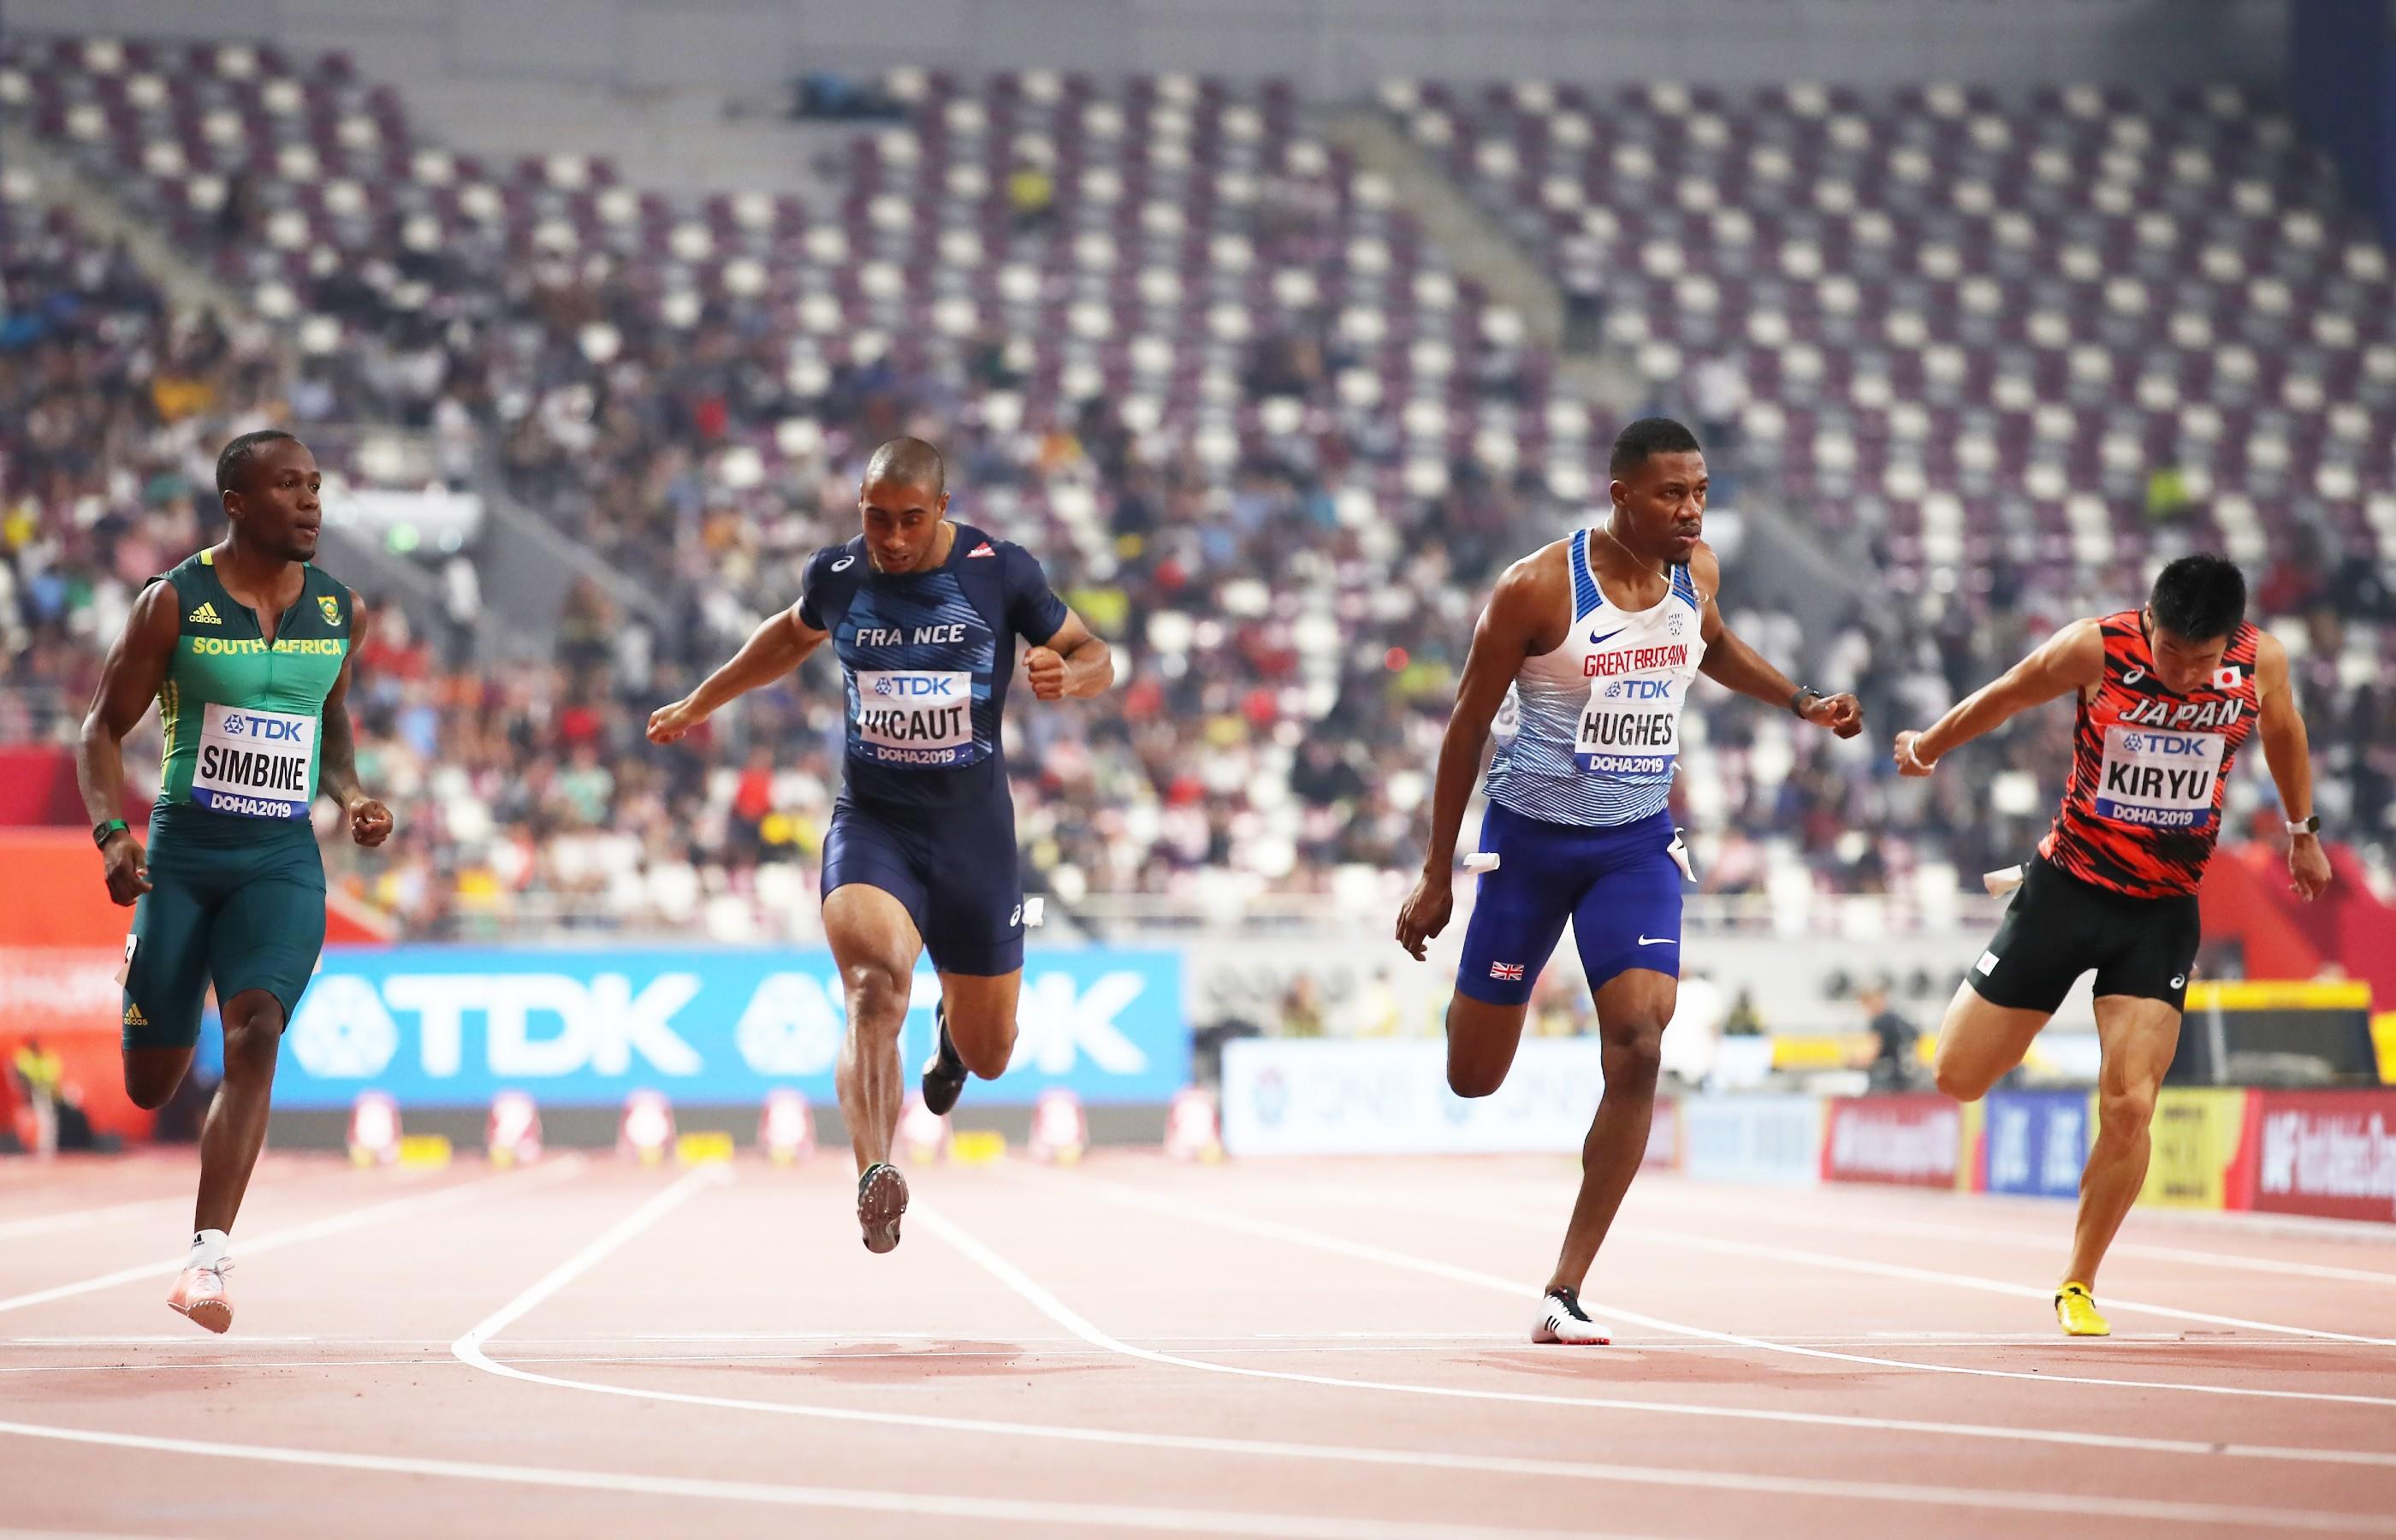 Men's 100m semifinals at the World Athletics Championships Doha 2019 (Getty Images)